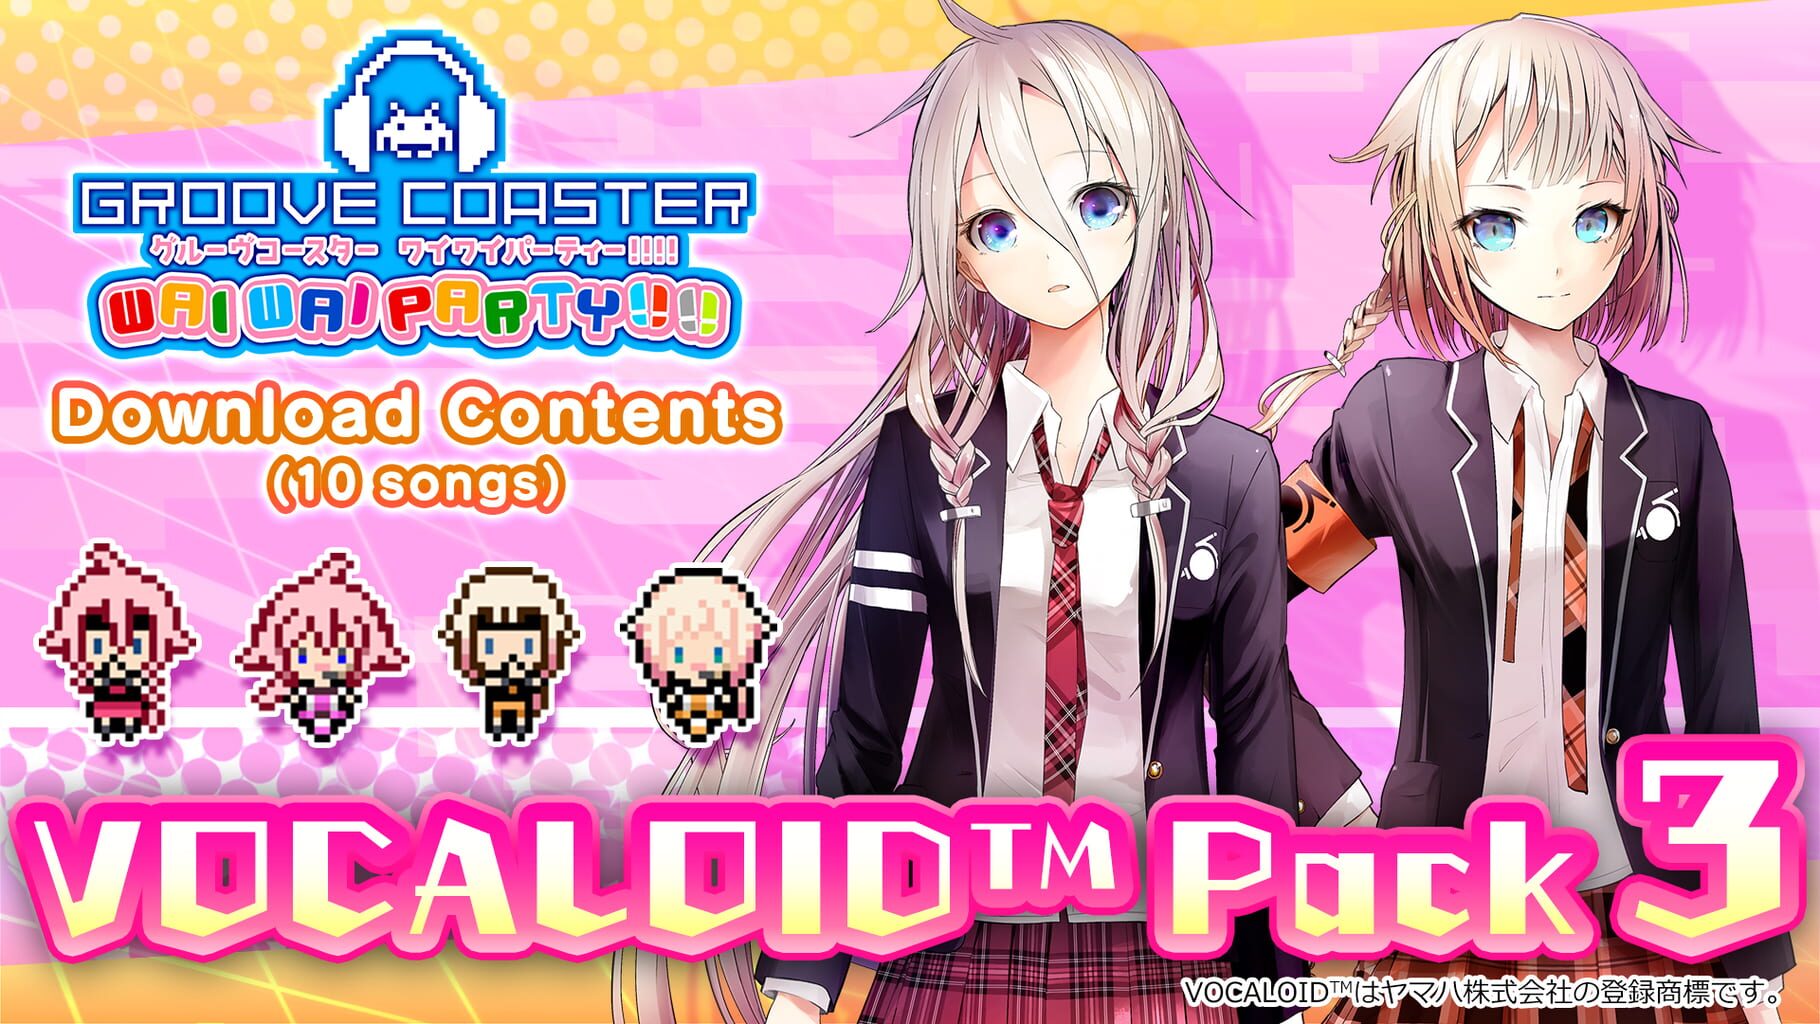 Groove Coaster: Wai Wai Party!!!! - Vocaloid Pack 3 artwork